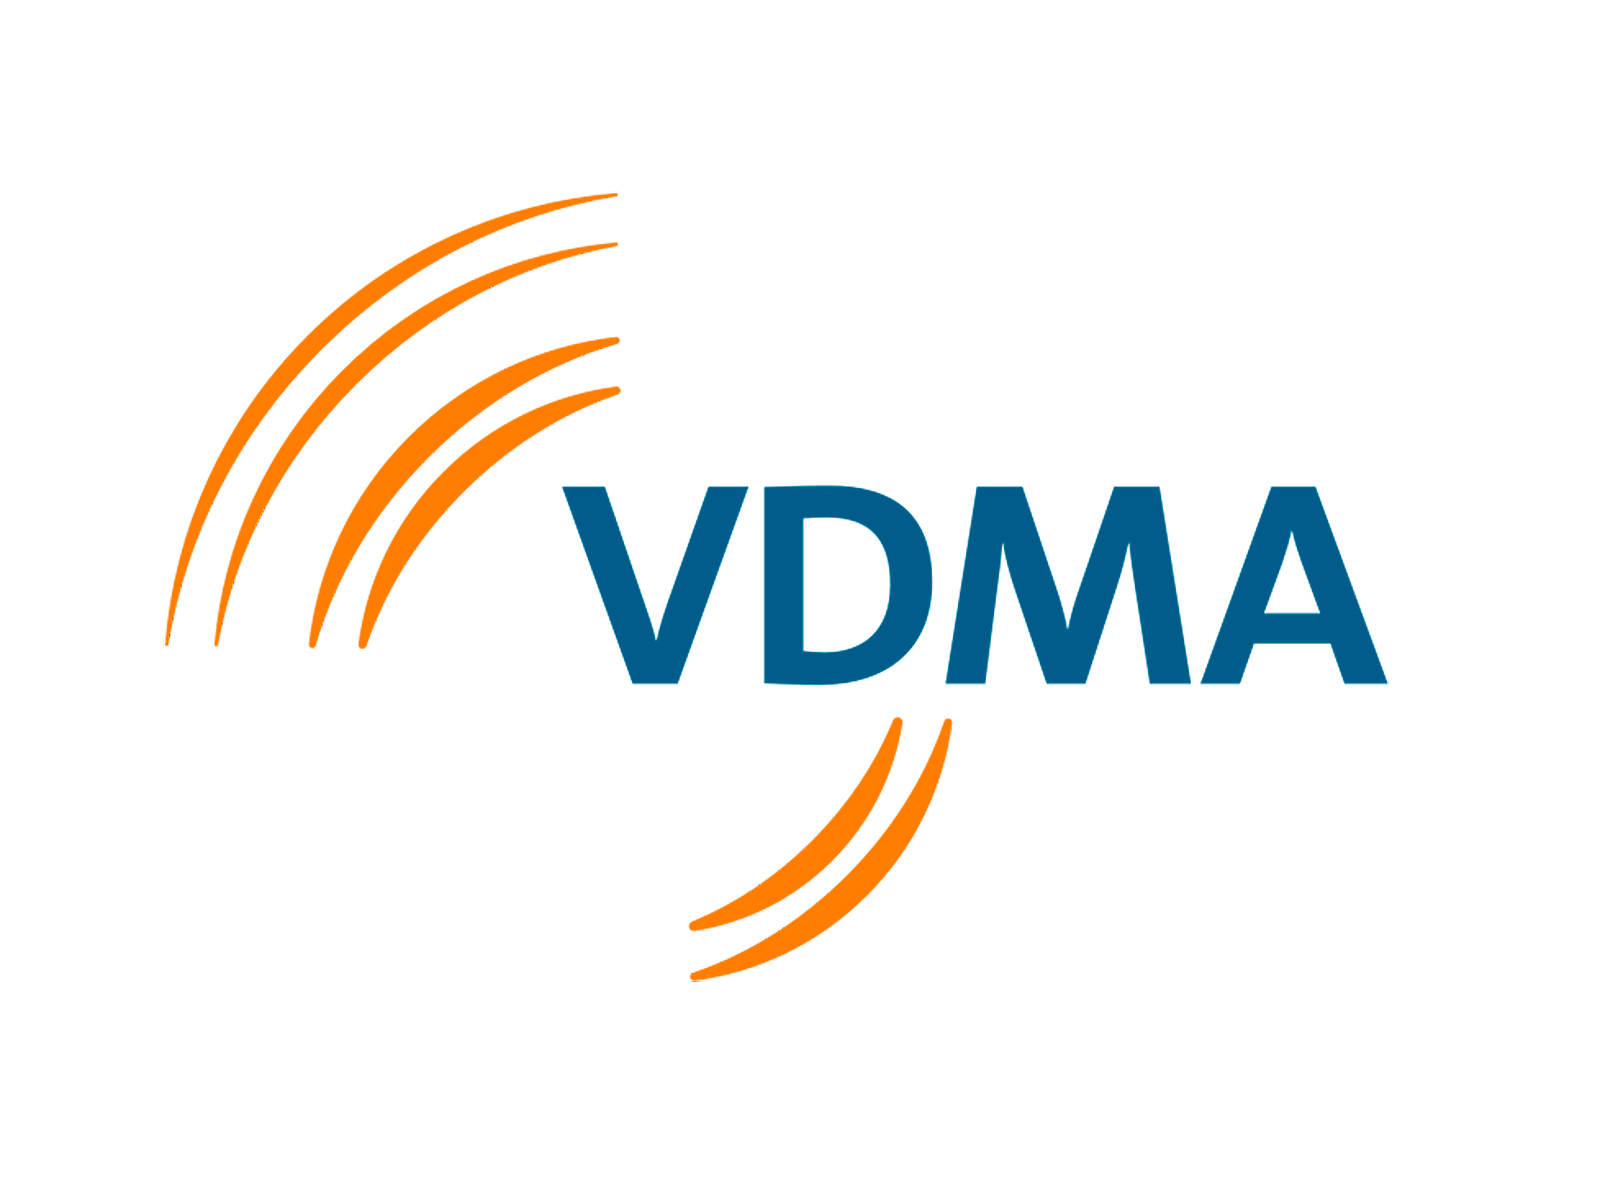 The image shows the VDMA logo on a white background